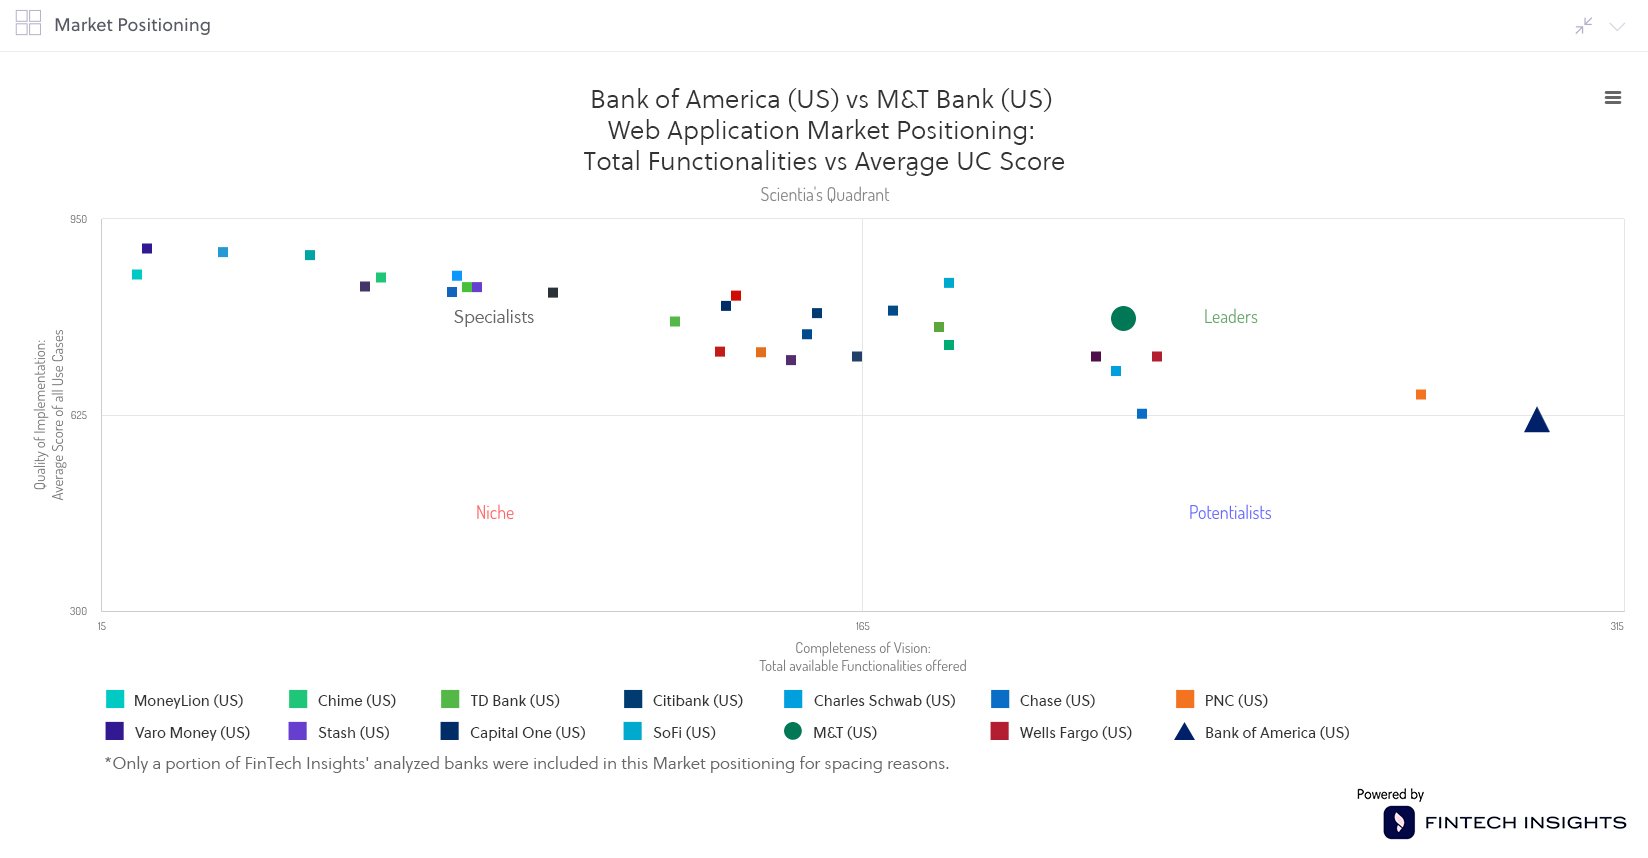 Positioning for the Web channel in the US Market BofA vs M&T bank